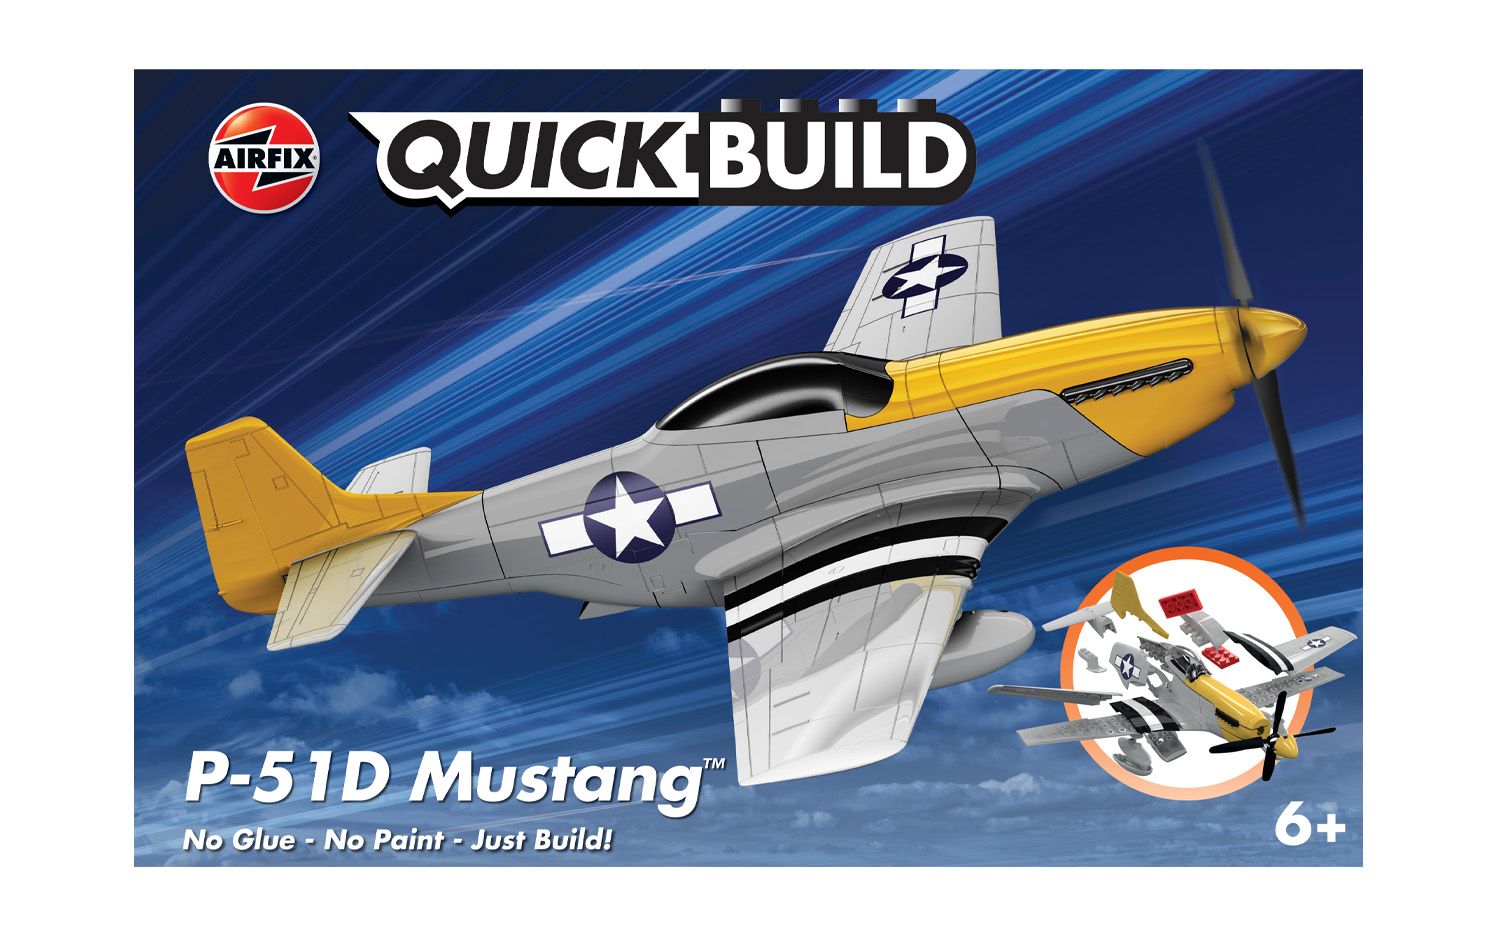 QUICKBUILD P-51D Mustang - Loaded Dice Barry Vale of Glamorgan CF64 3HD